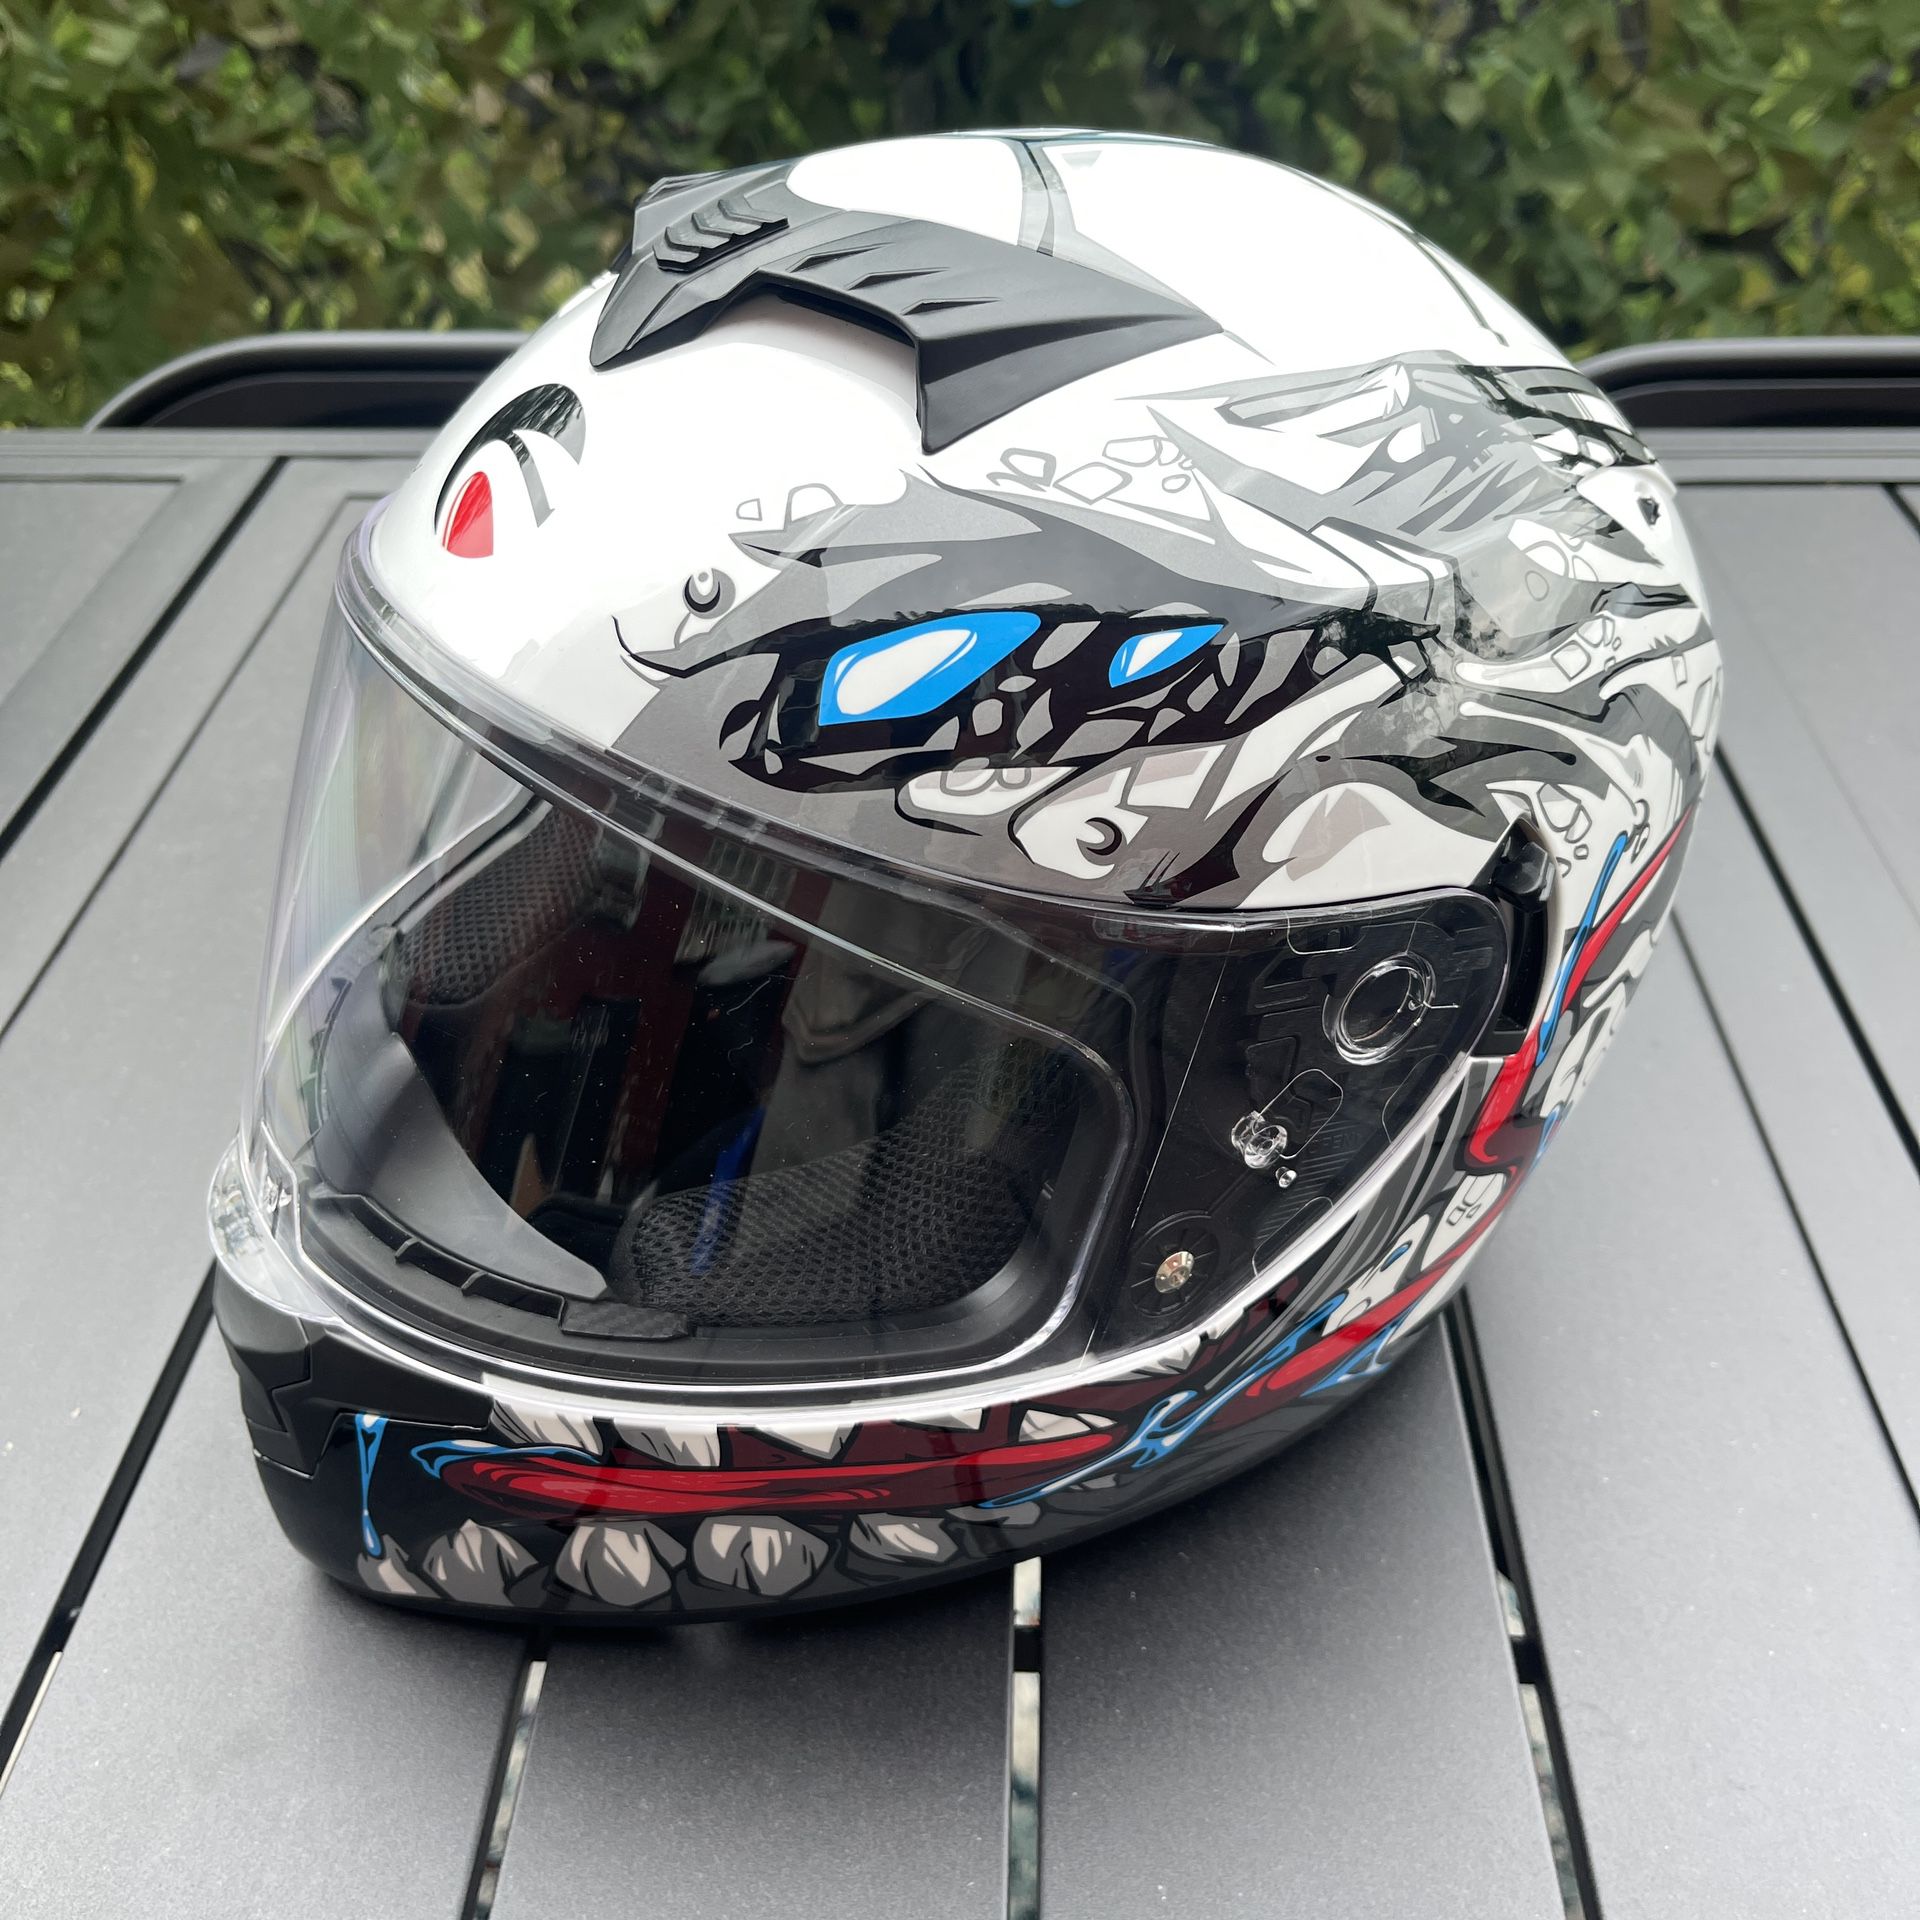 Full Face Dual Visor Motorcycle Helmet with Graphic Size Small